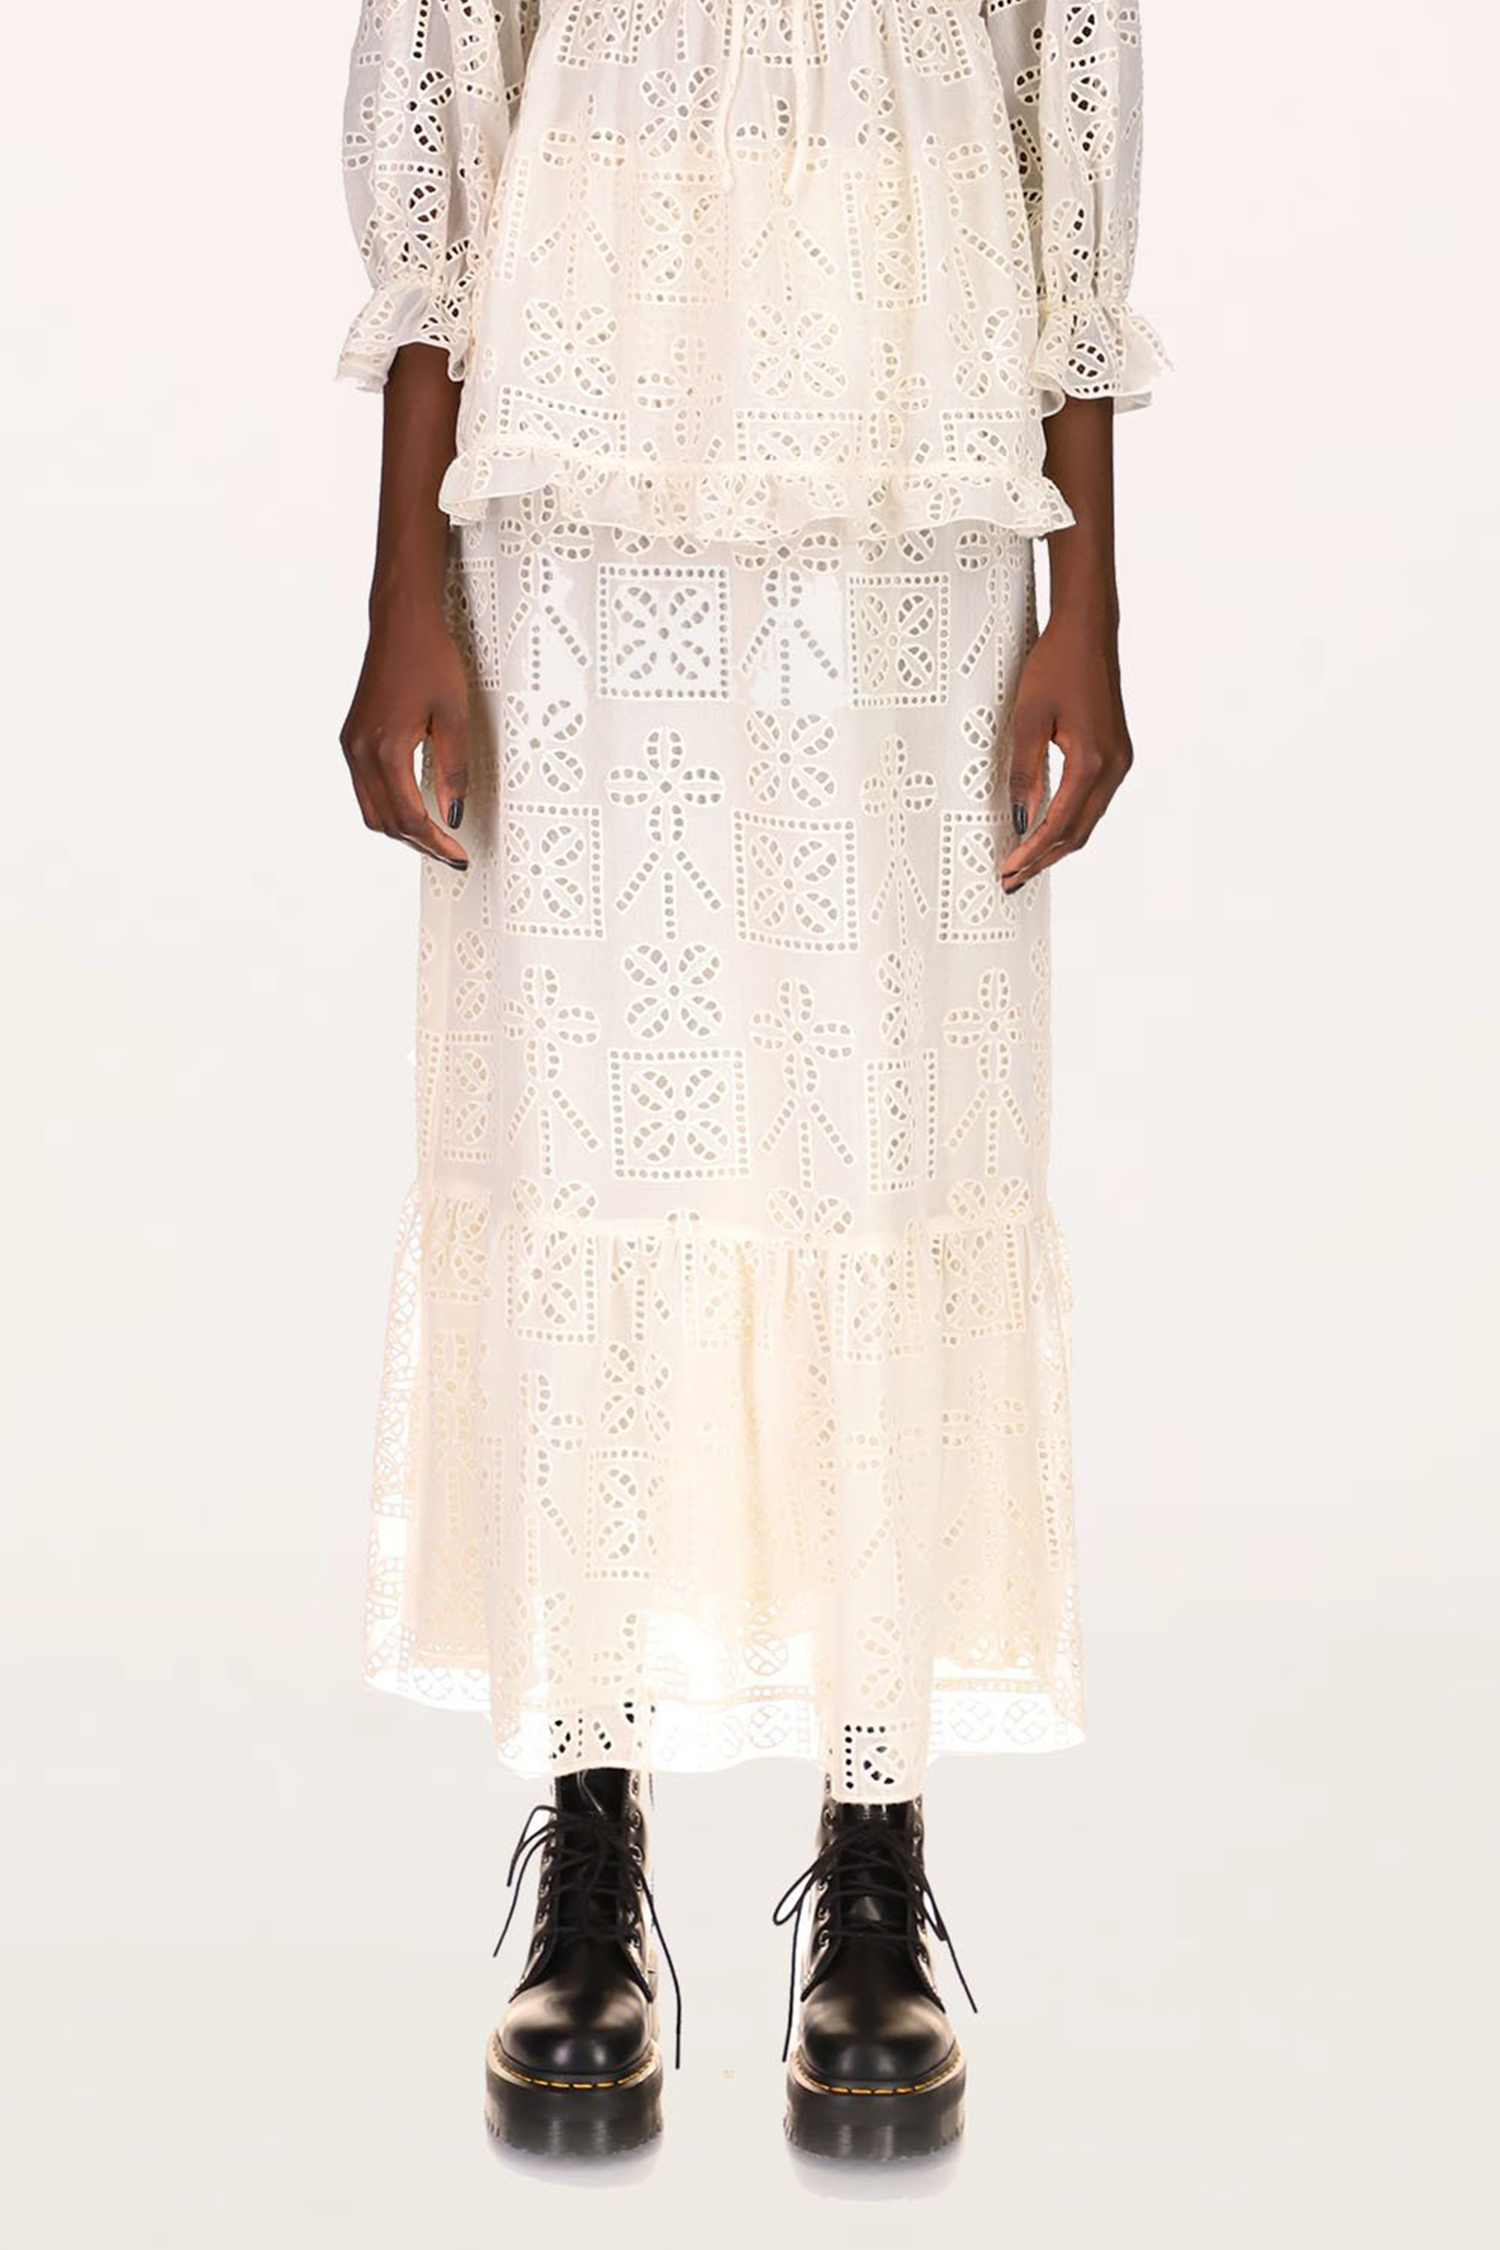 Aesthetic Eyelet Skirt Cream, ankles long, stylized flowers with cutouts, and dotted cutouts lines